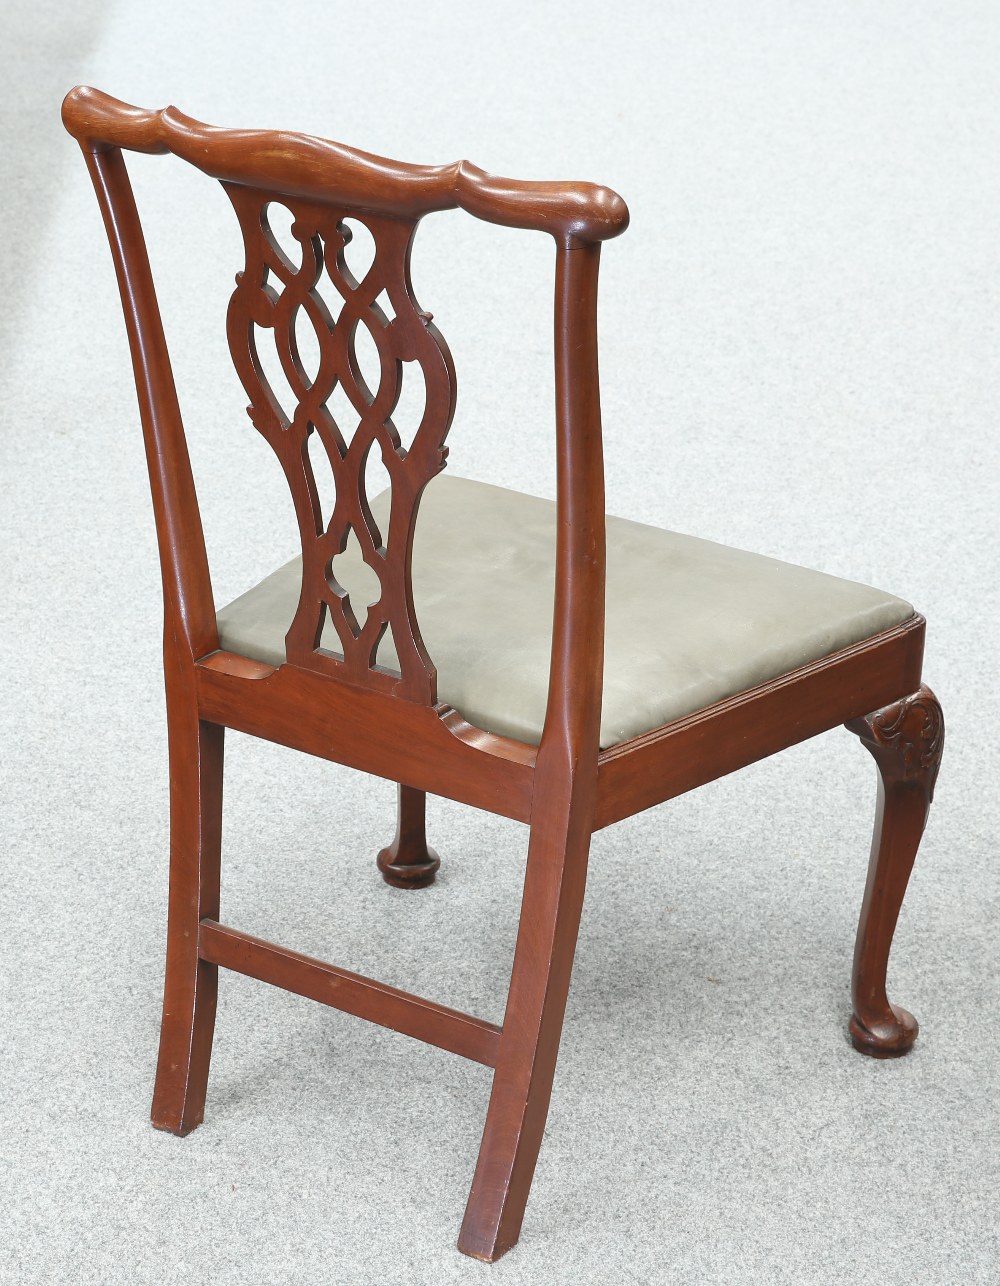 A LATE 19TH CENTURY MAHOGANY CHIPPENDALE STYLE CHAIR - Image 2 of 3